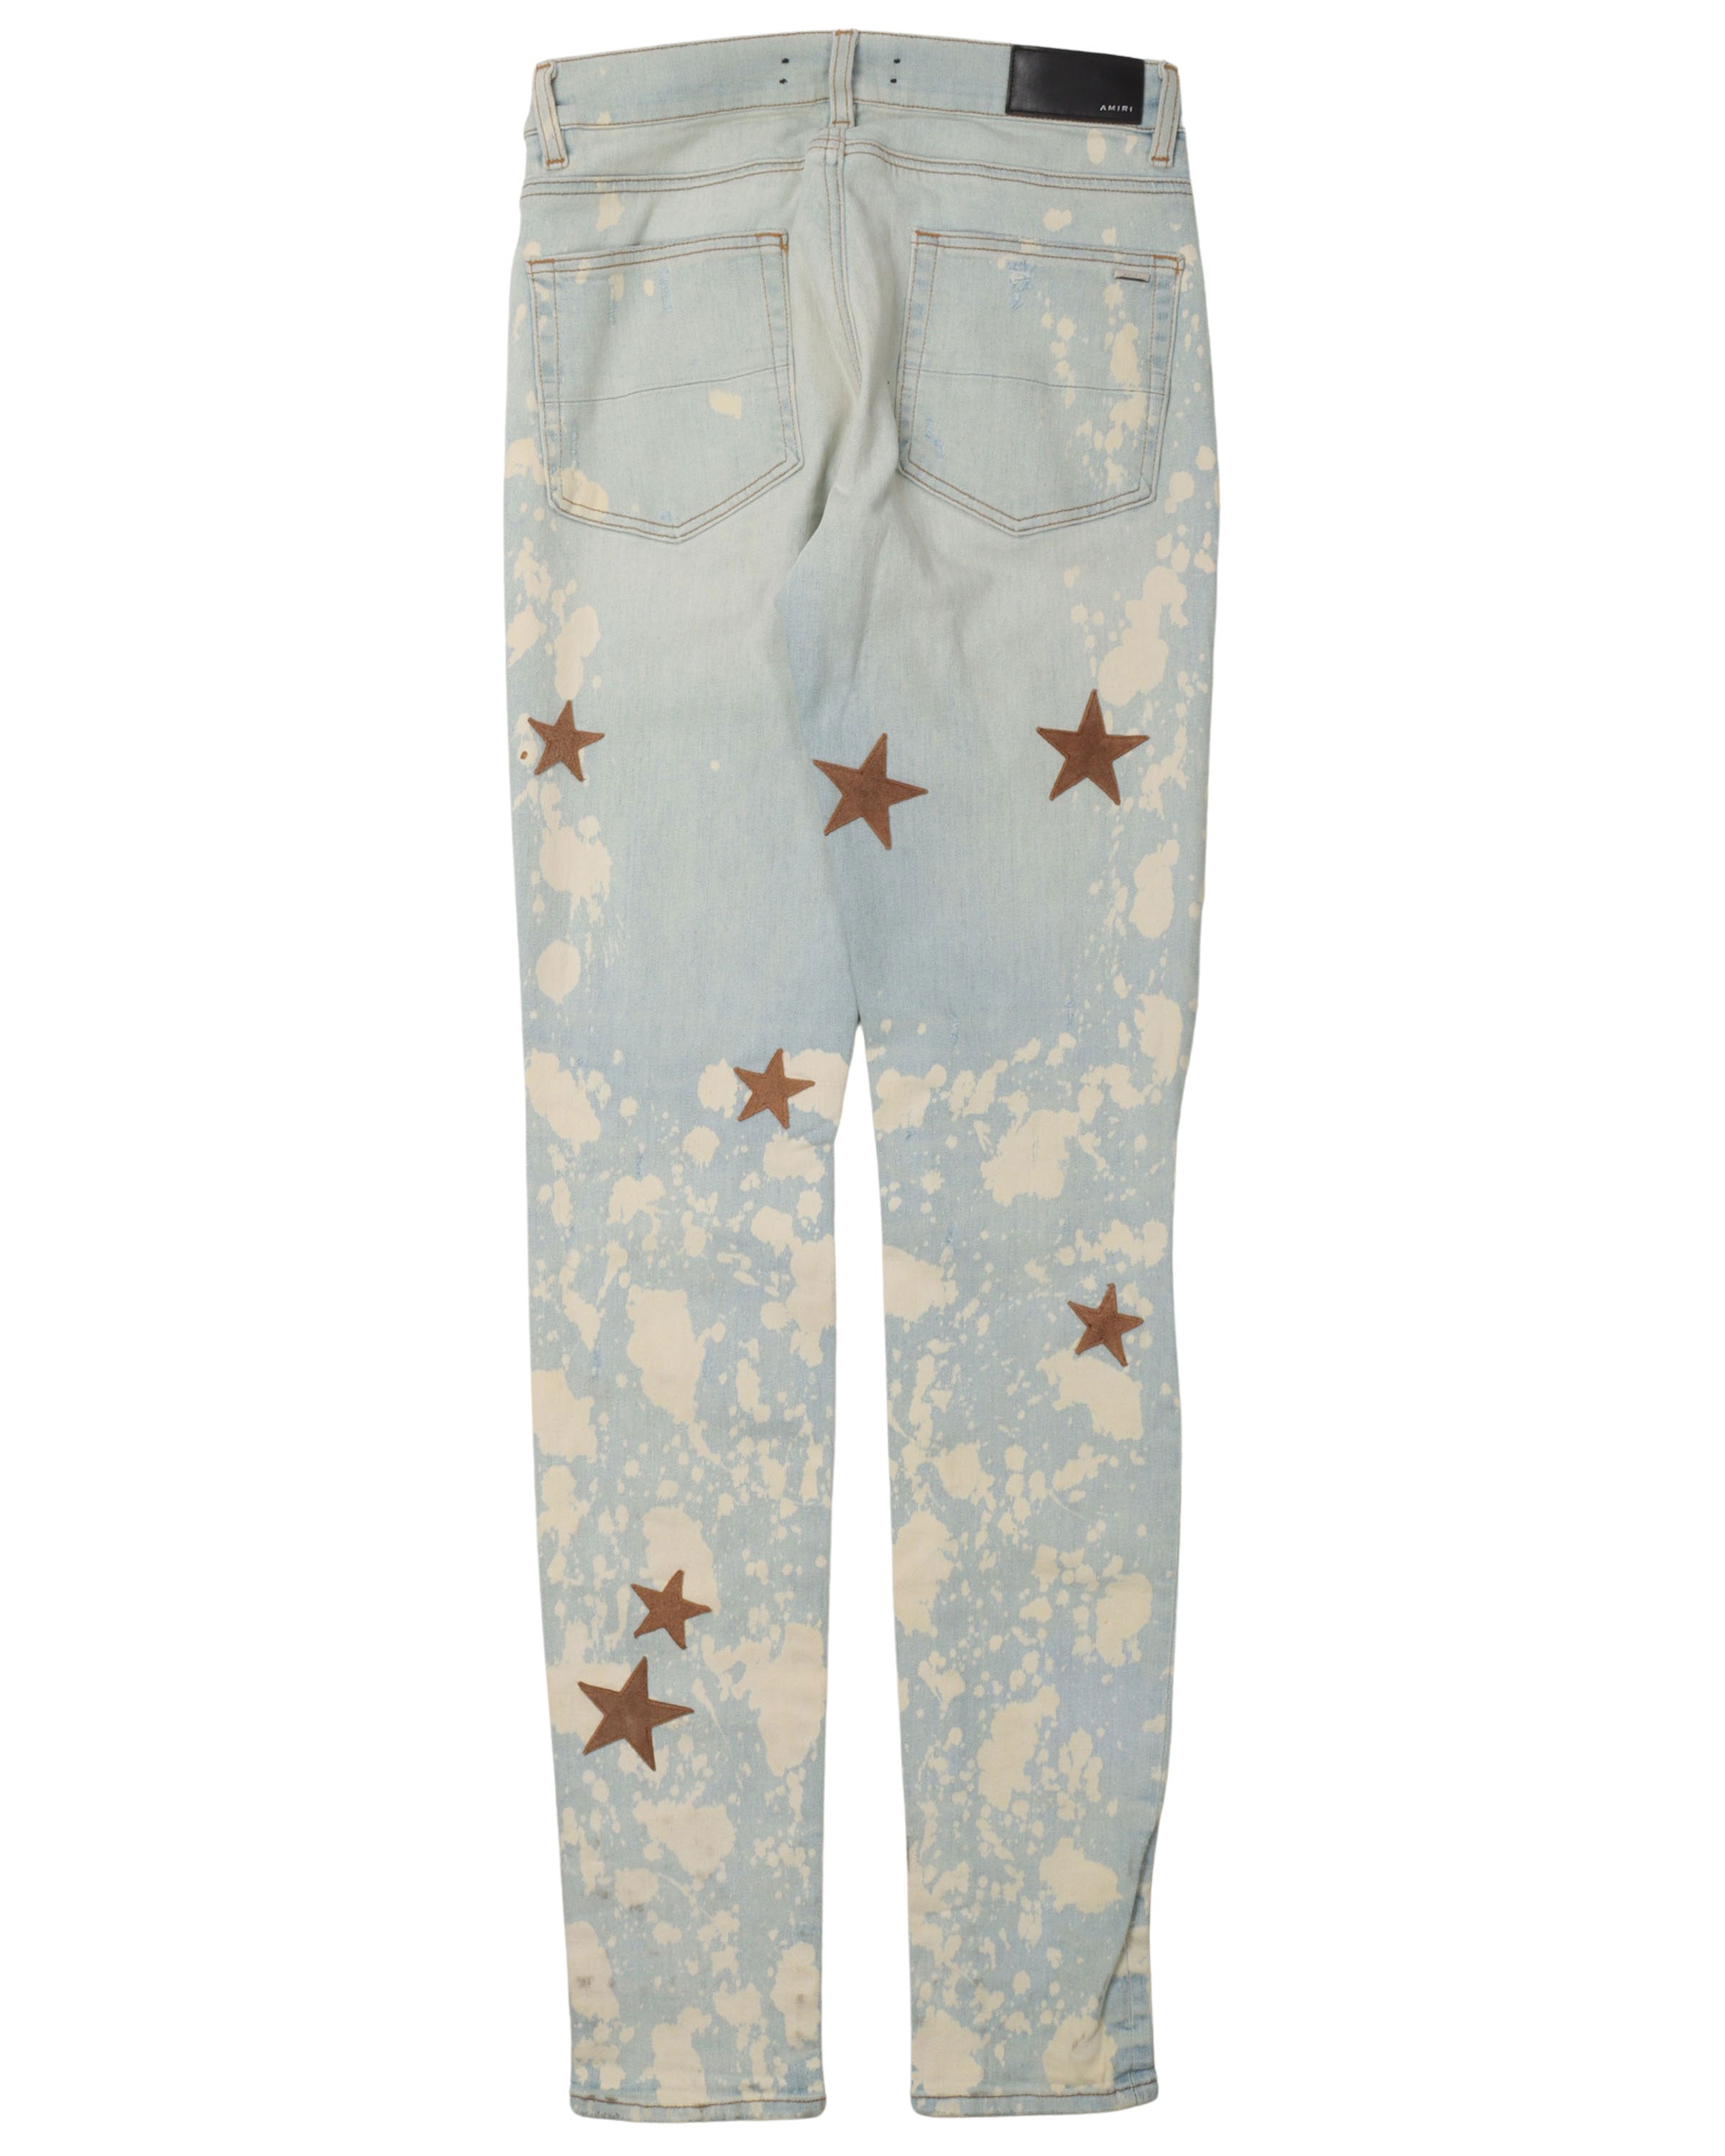 Space Weed Jeans